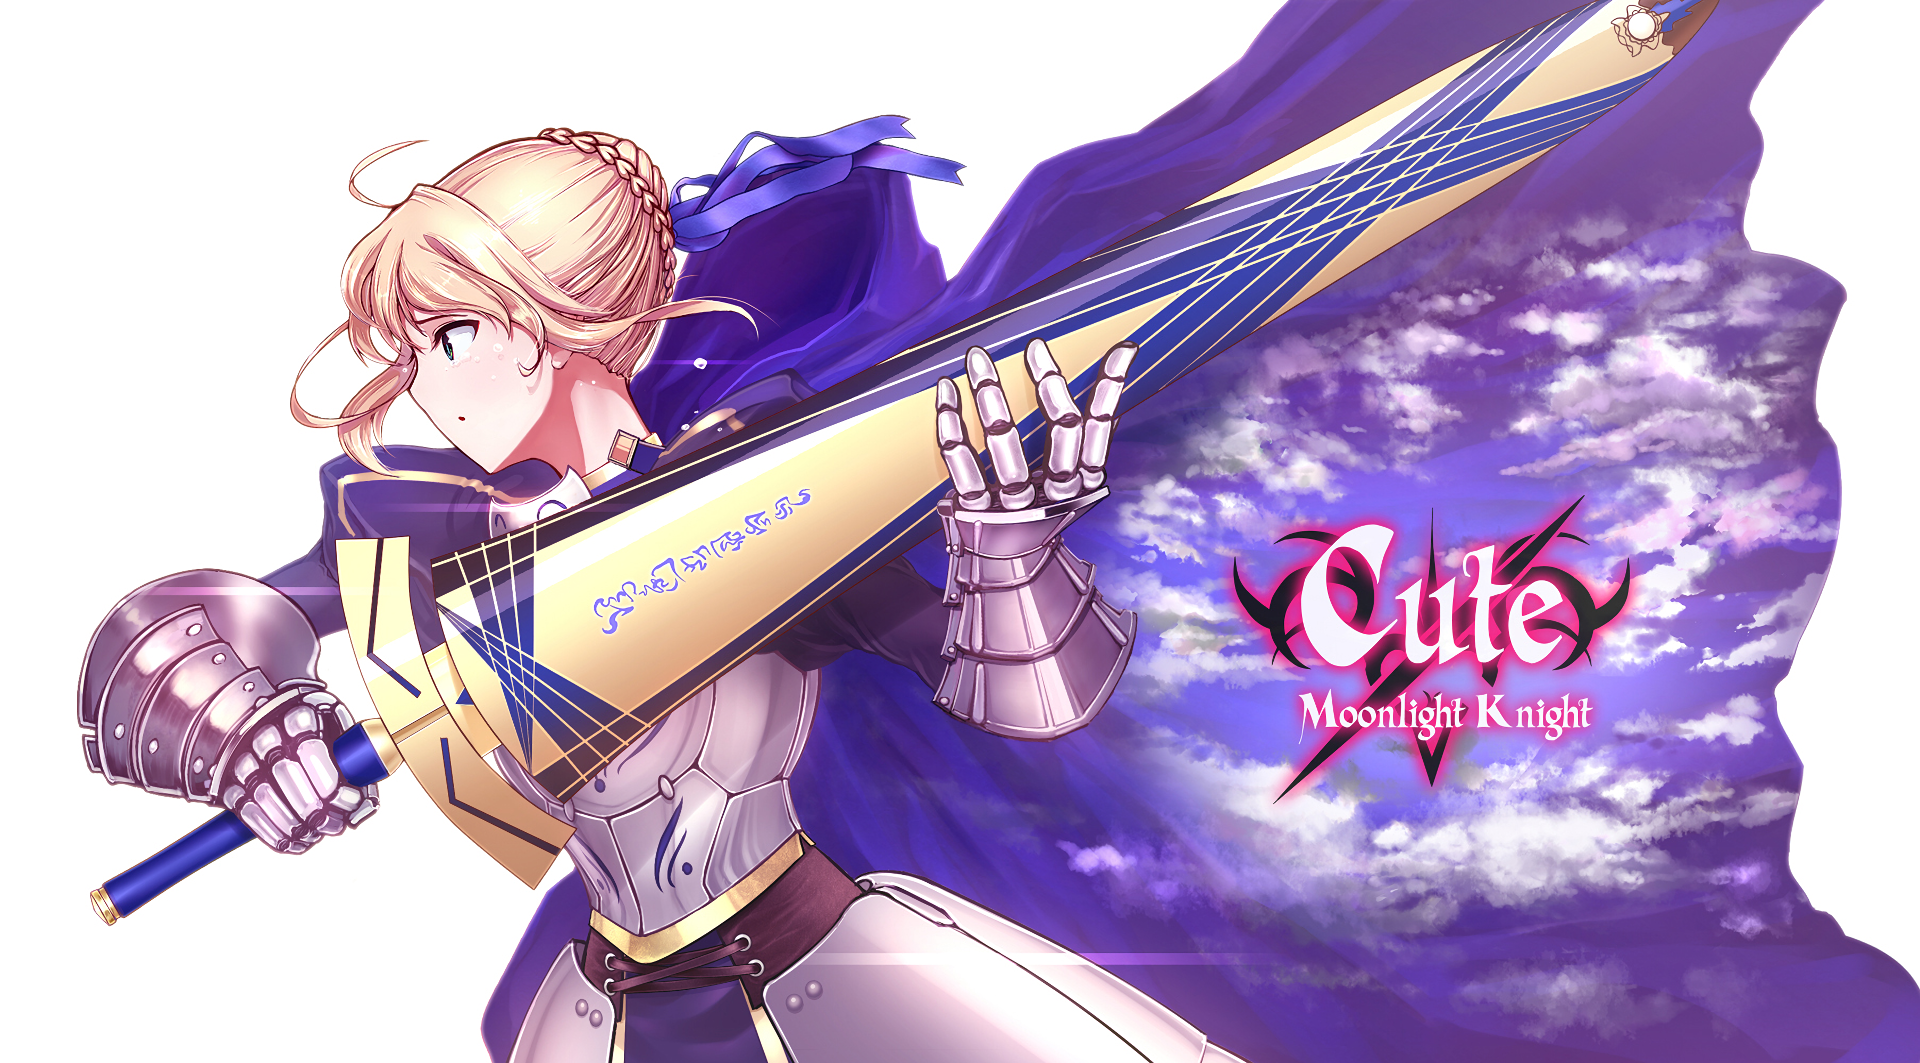 Anime 1920x1063 Fate series Fate/Stay Night anime girls Saber